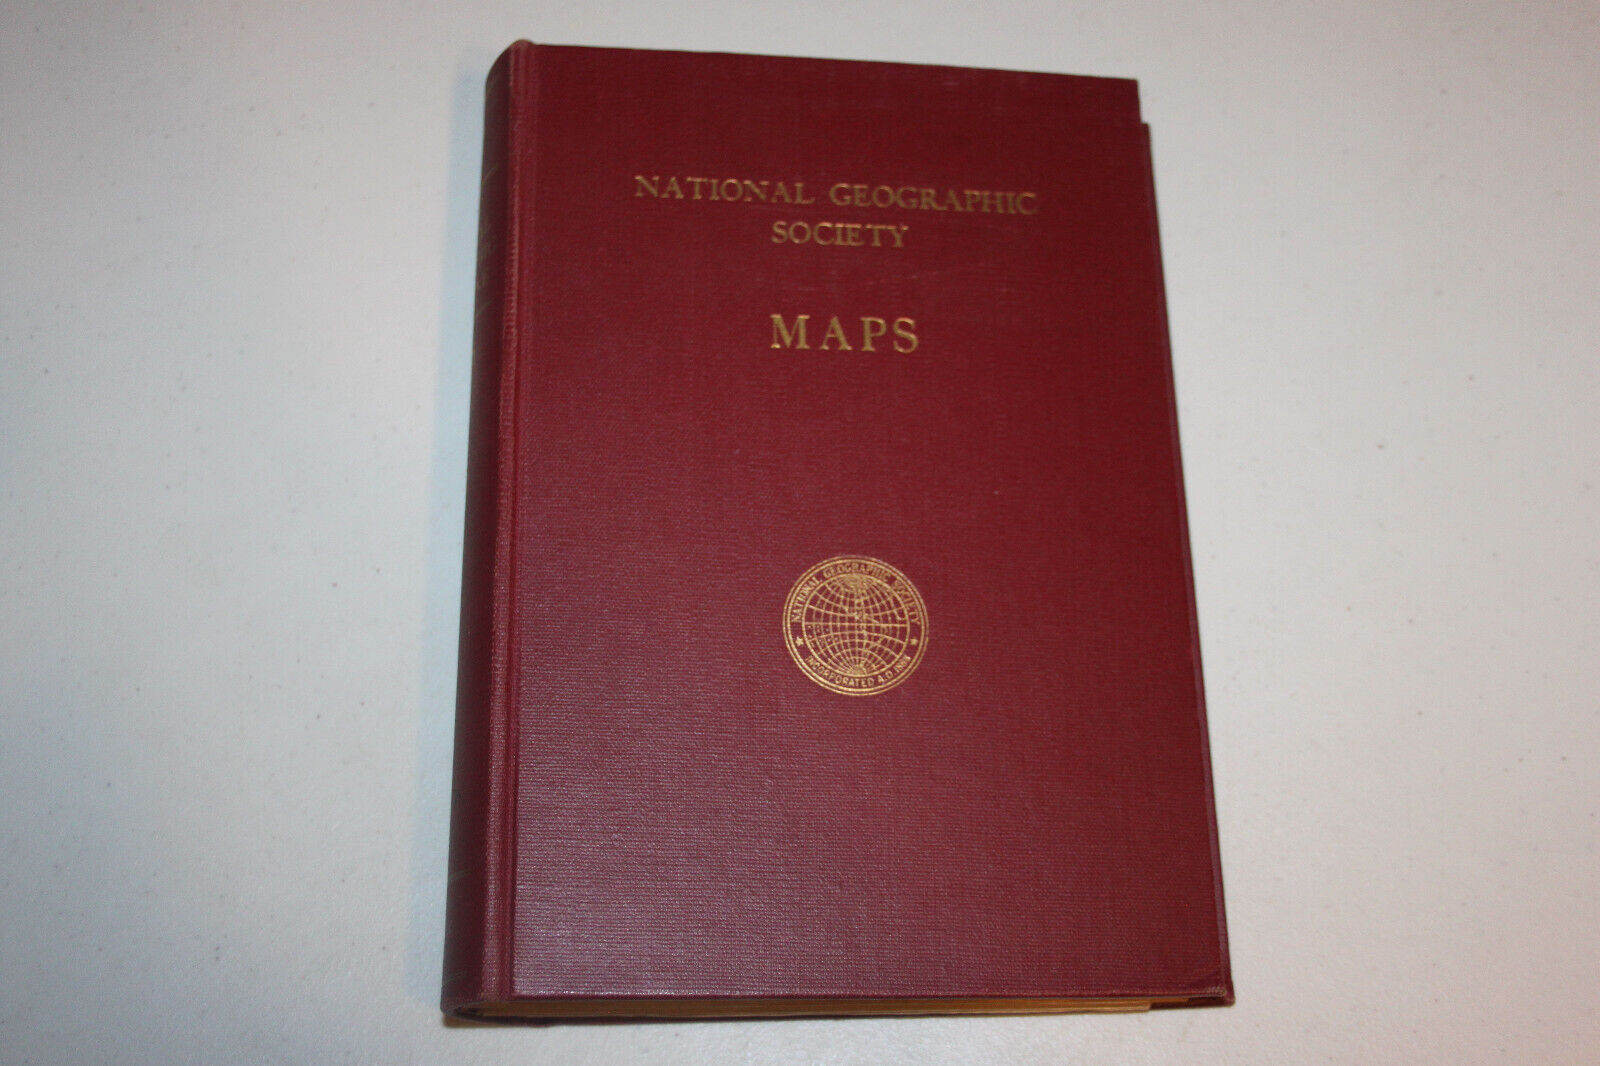 Vintage National Geographic Society Maps In Binder, 7 Maps From The 1940's,50's